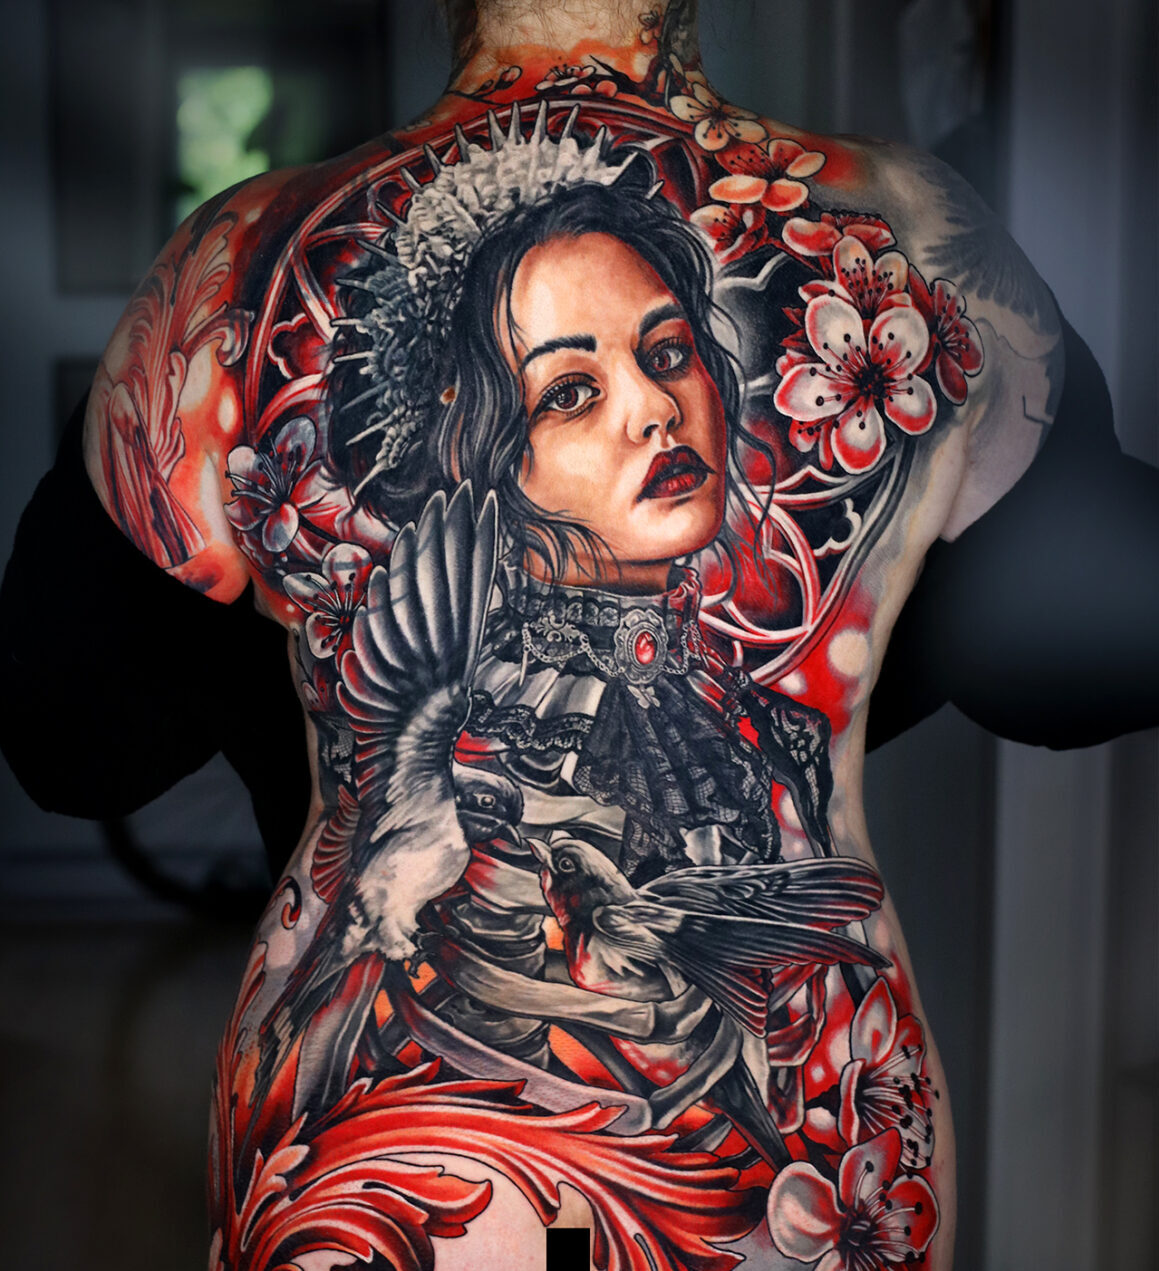 Tattoo by Michael Cloutier, @cloutiermichael